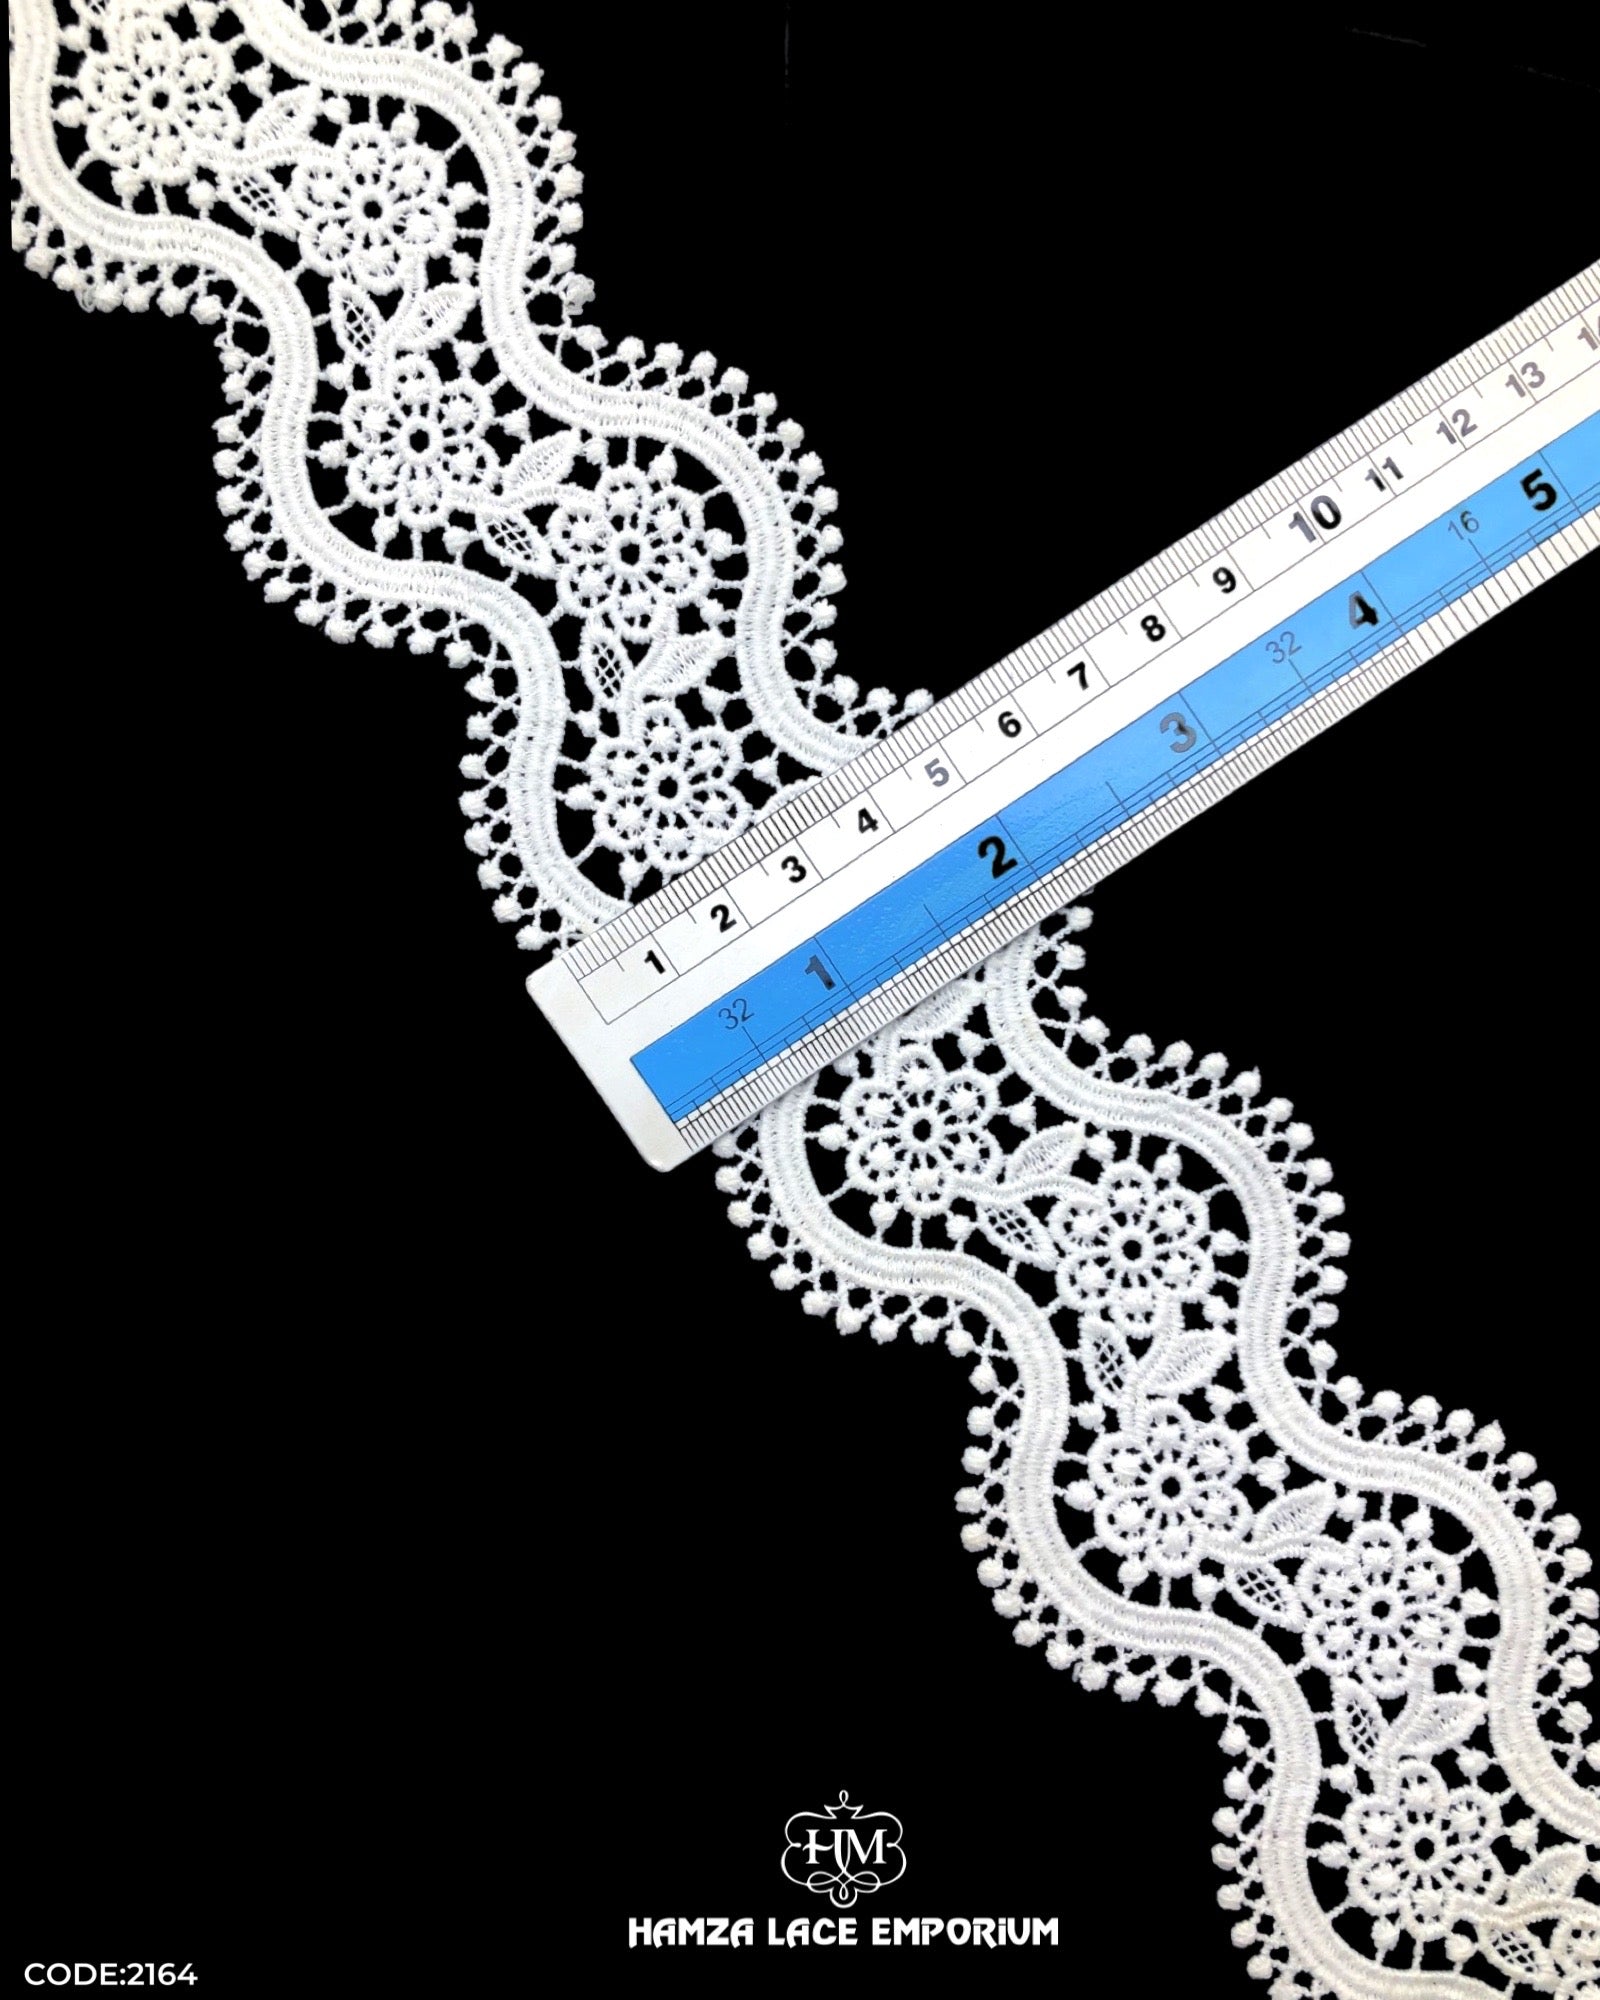 Size of the 'Center Filling Lace 2164' is shown as '2' inches with the help of a ruler